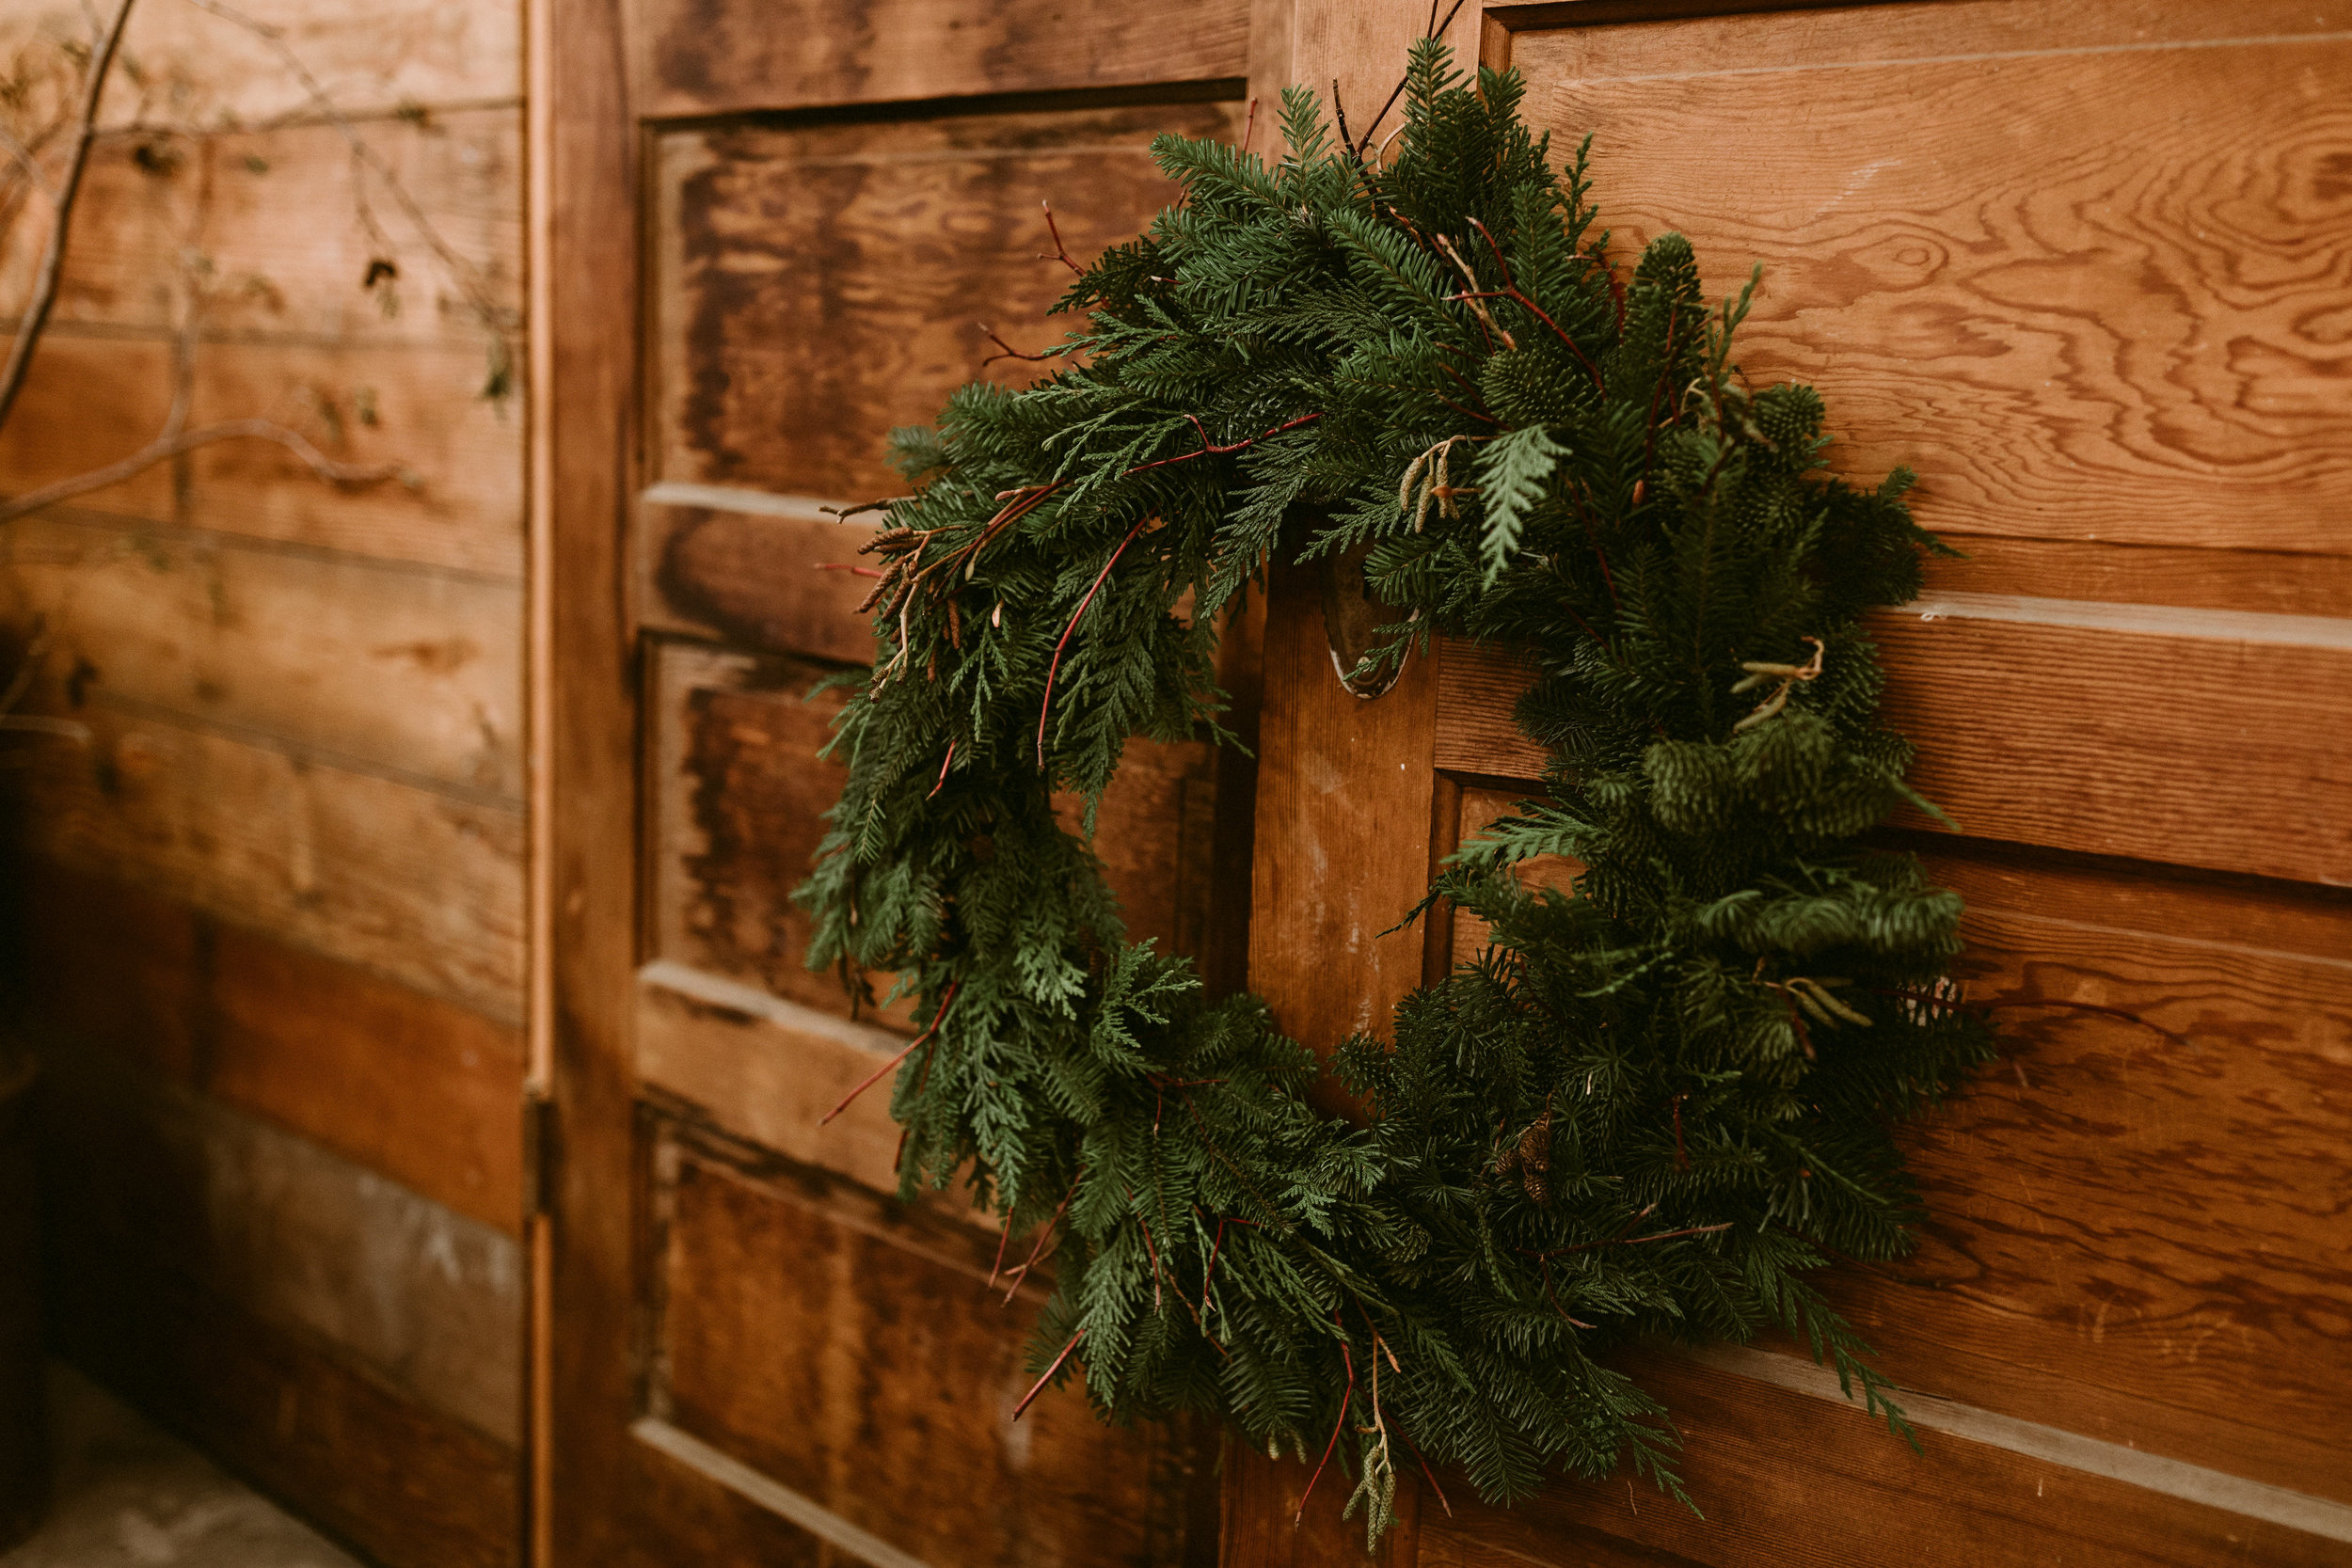 Wreaths Decorating Party: Event Pro's How-To's and Tips